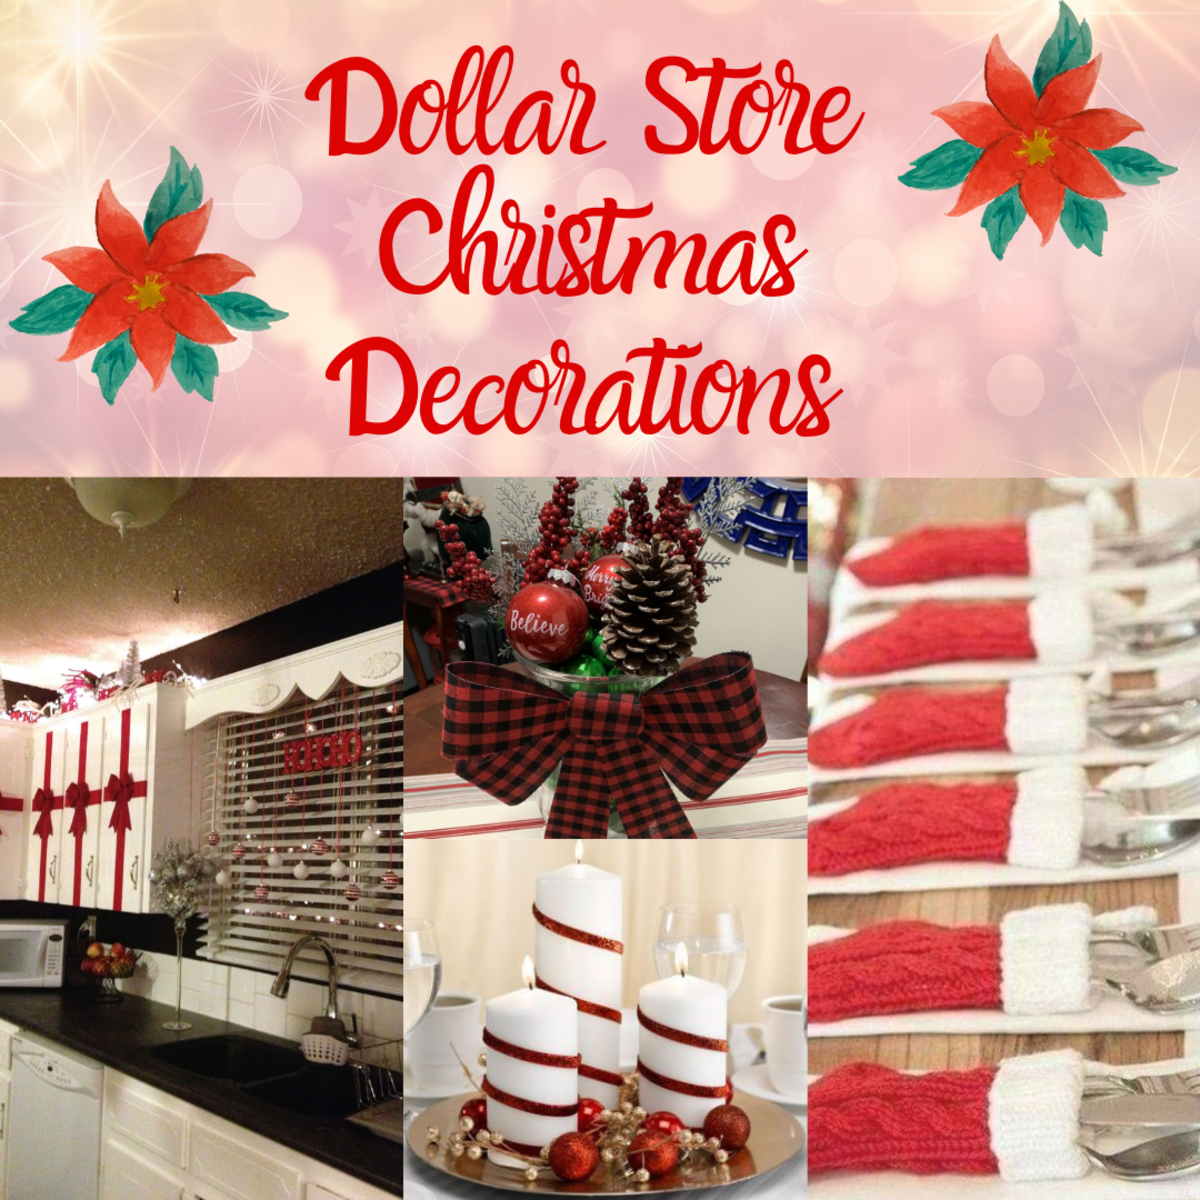 100+ Easy DIY Dollar Store Christmas Decorations that are so Joyful to Make